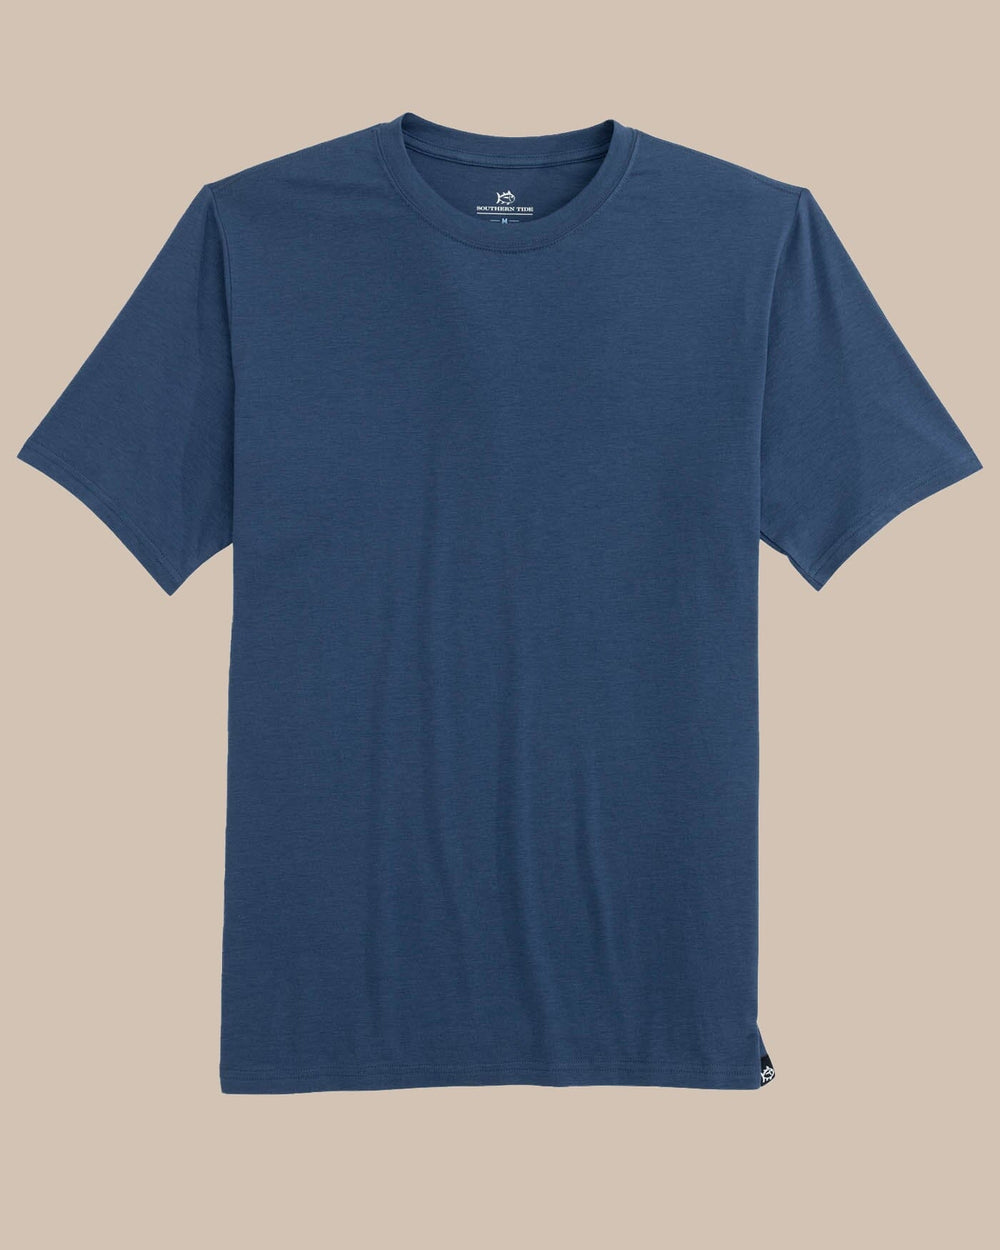 The front view of the Southern Tide The Seaport T-Shirt by Southern Tide - Aged Denim